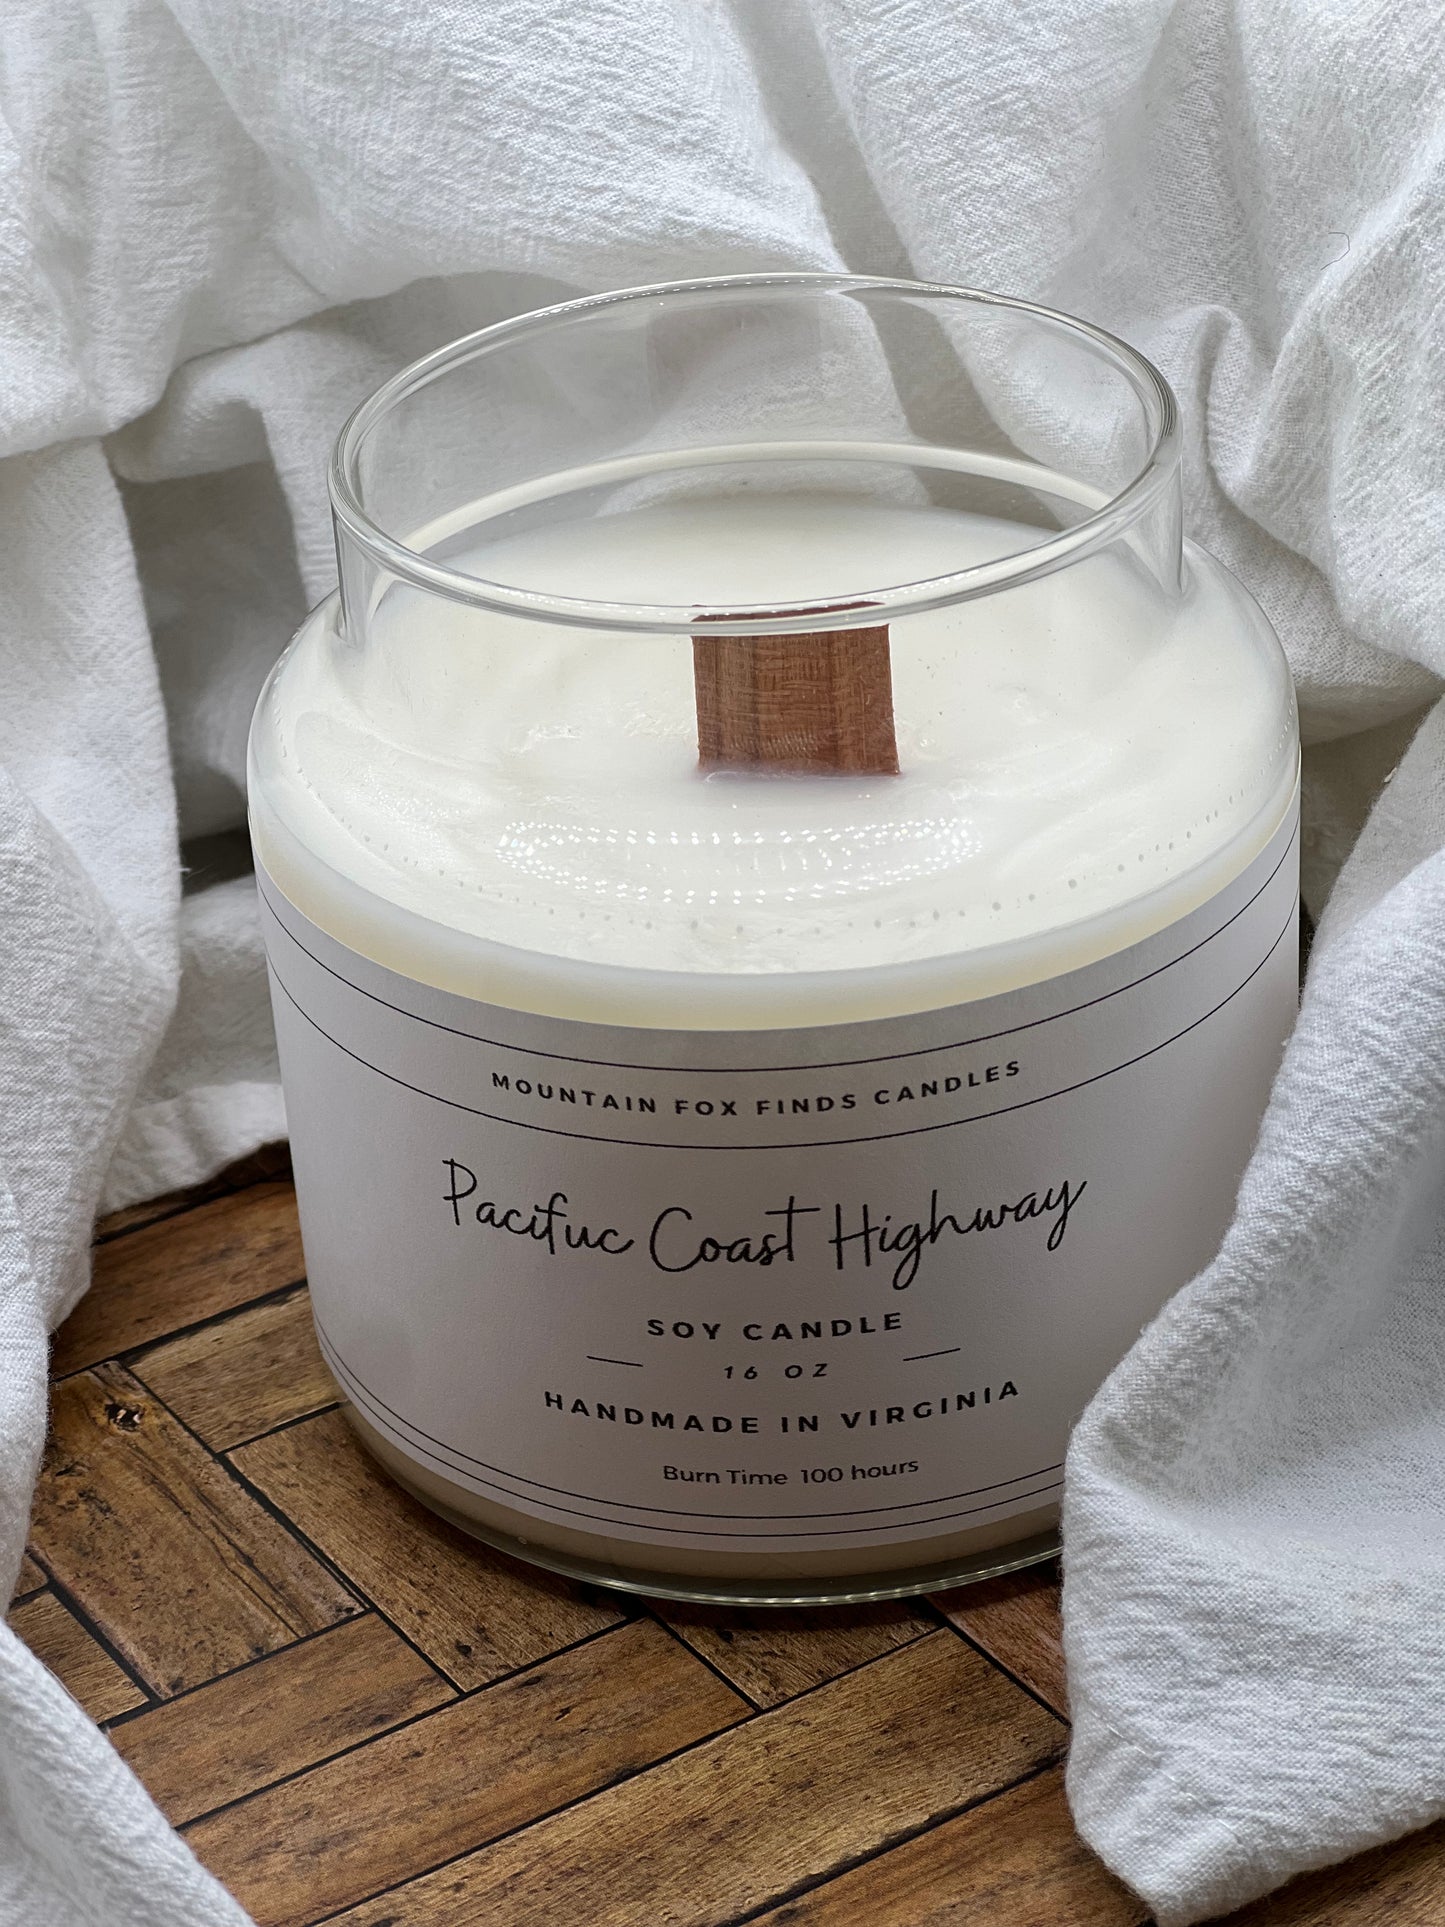 Apothecary Jar Candle - Pacific Coast Highway